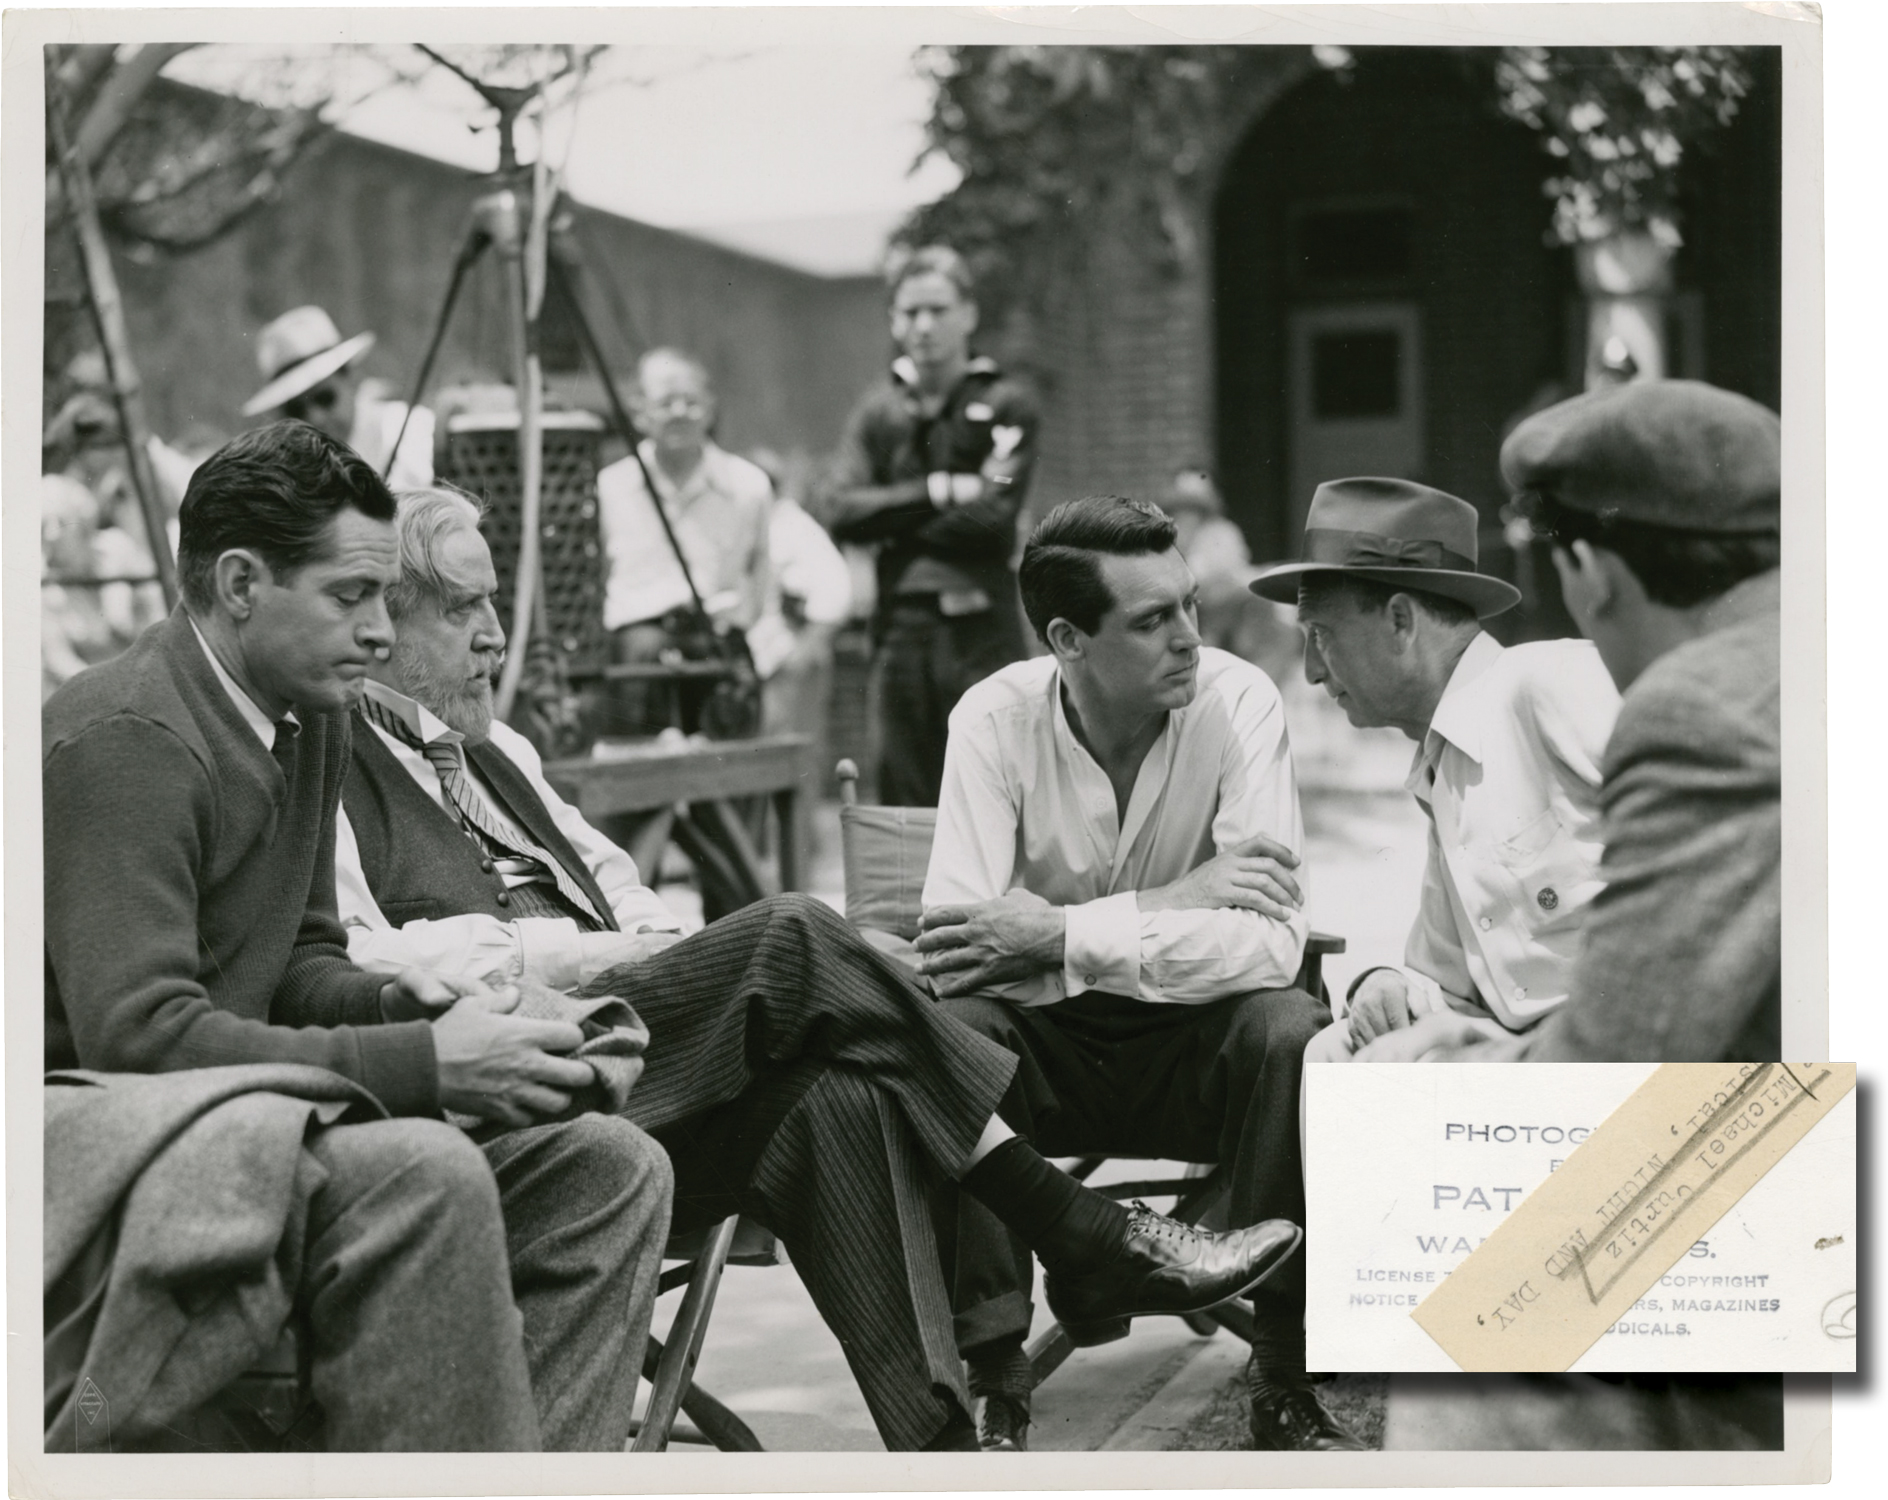 Black and white vintage photograph from the 1946 film, Night and Day, showing director Michael Curtiz, and stars Cary Grant, Monty Woolley, and Donald Woods conferring on the set. With the stamp of photographer Pat Clark and a mimeo snipe on the verso. 